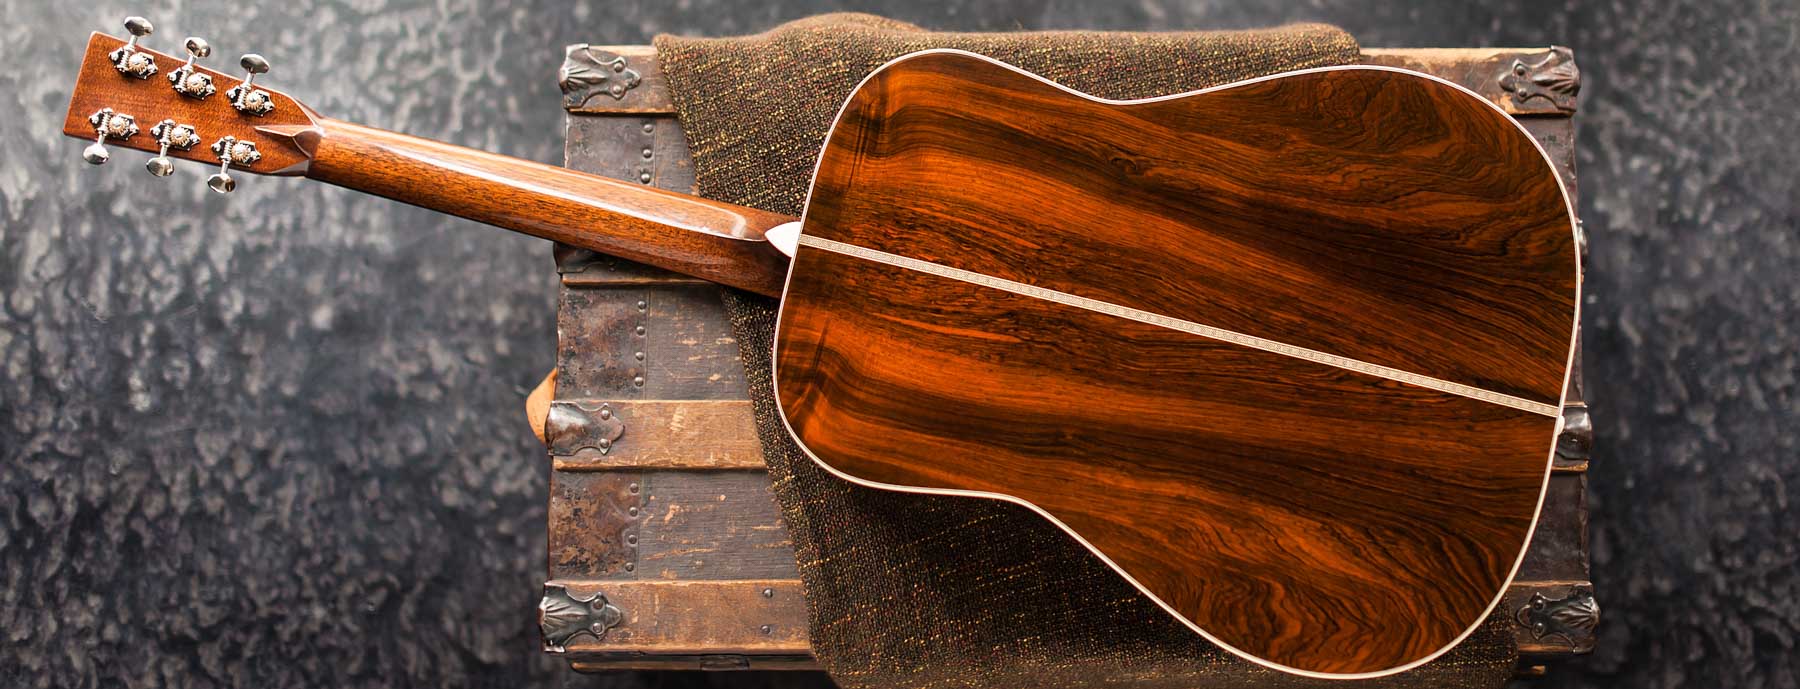 Preston Thompson Acoustic Guitars Exclusive Chris Luquette Signature Dreadnought guitar, handcrafted from Brazilian Rosewood. Back shot